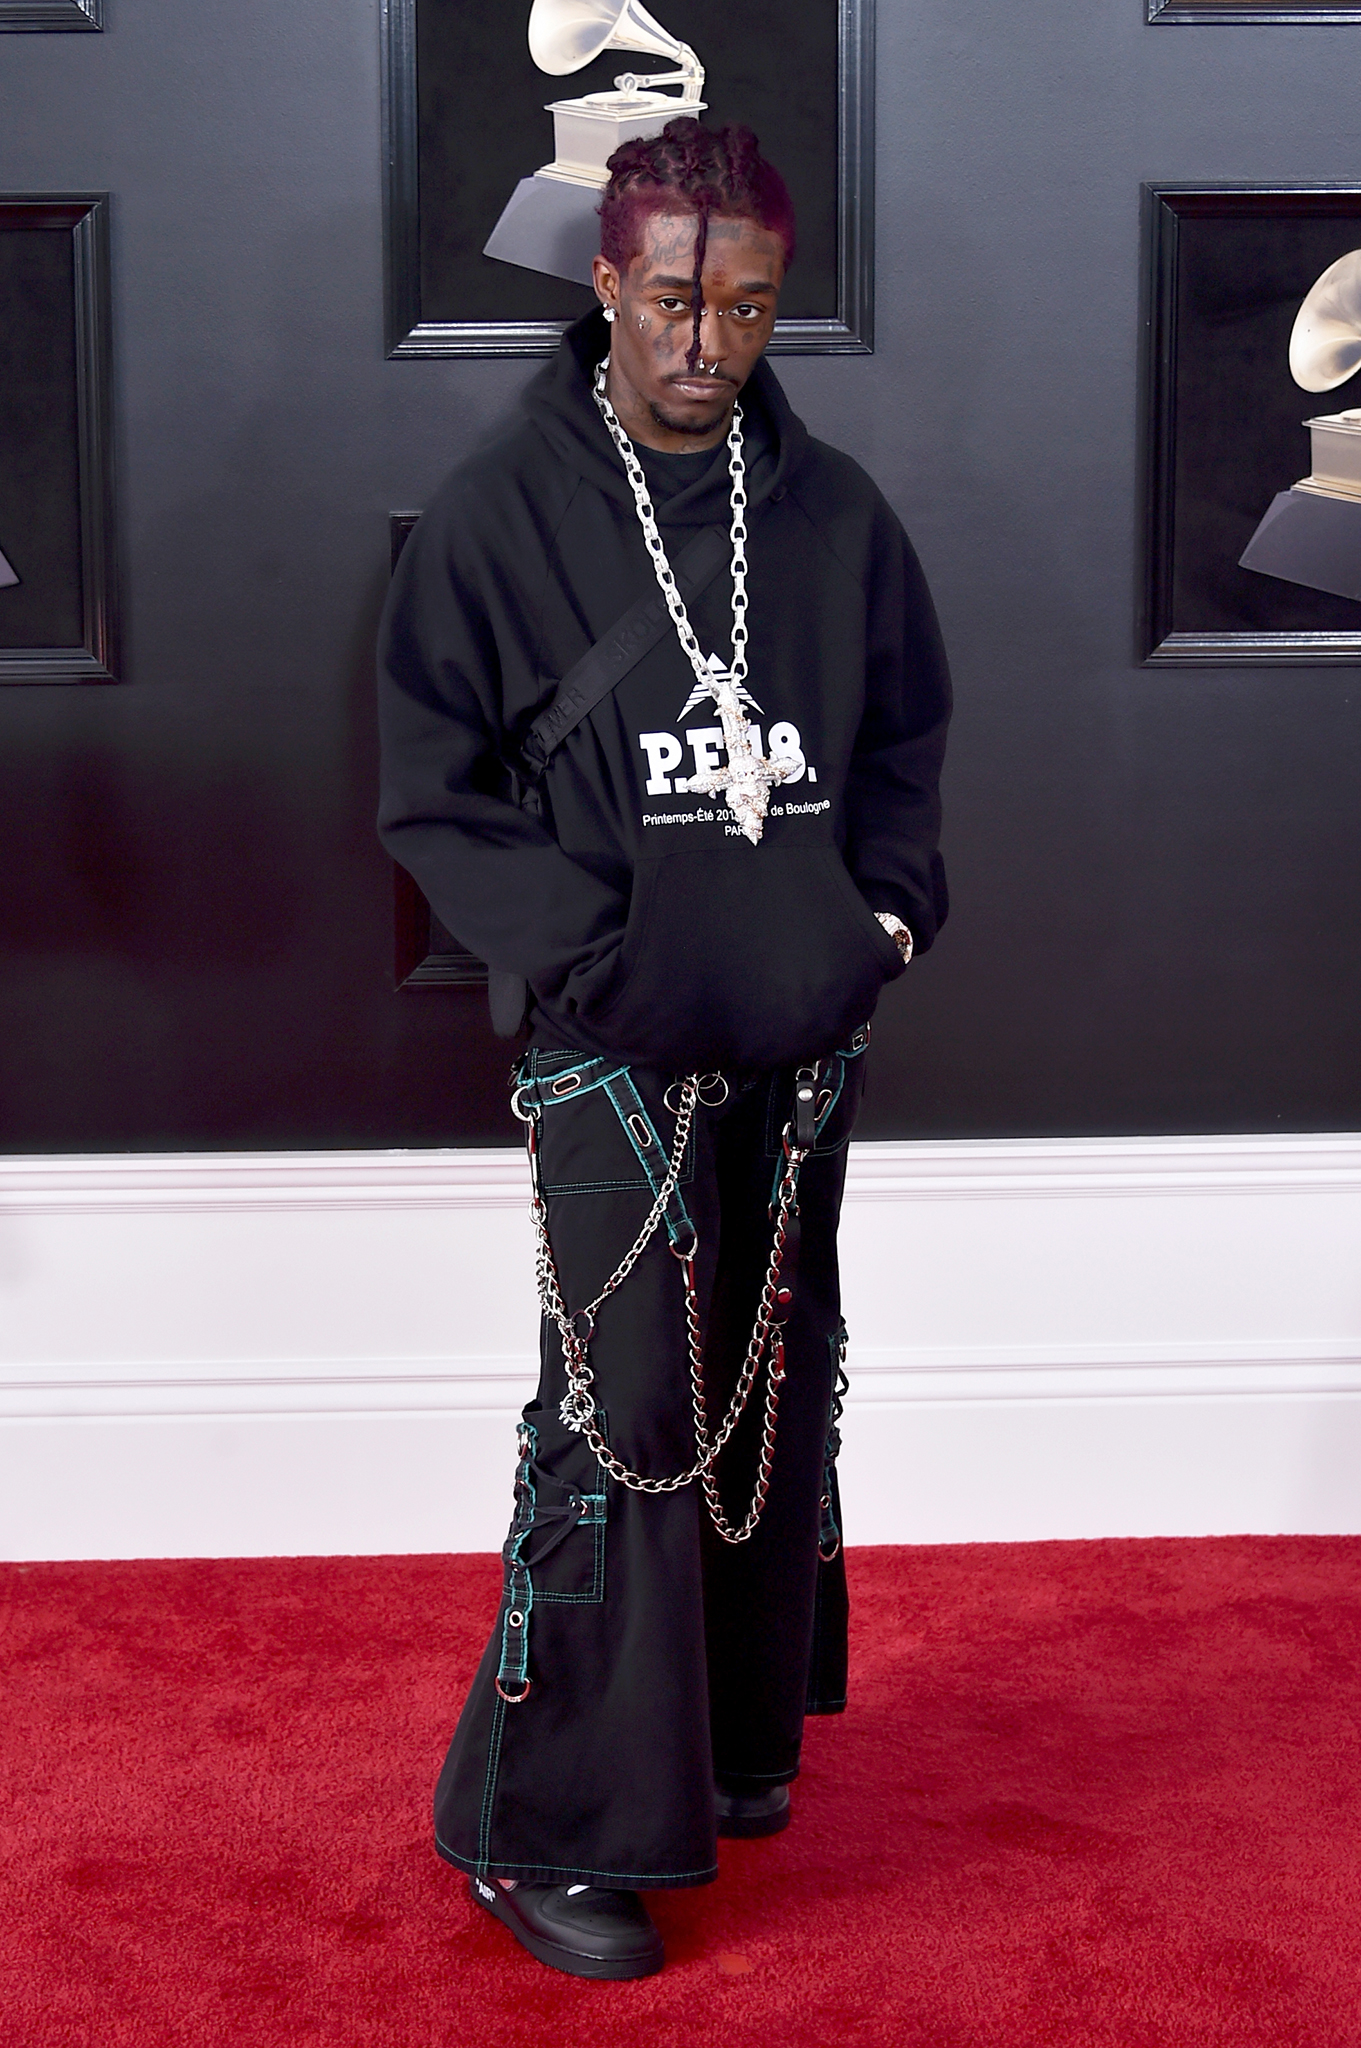 Recording artist Lil Uzi Vert attends the 60th Annual GRAMMY Awards at Madison Square Garden on January 28, 2018 in New York City.